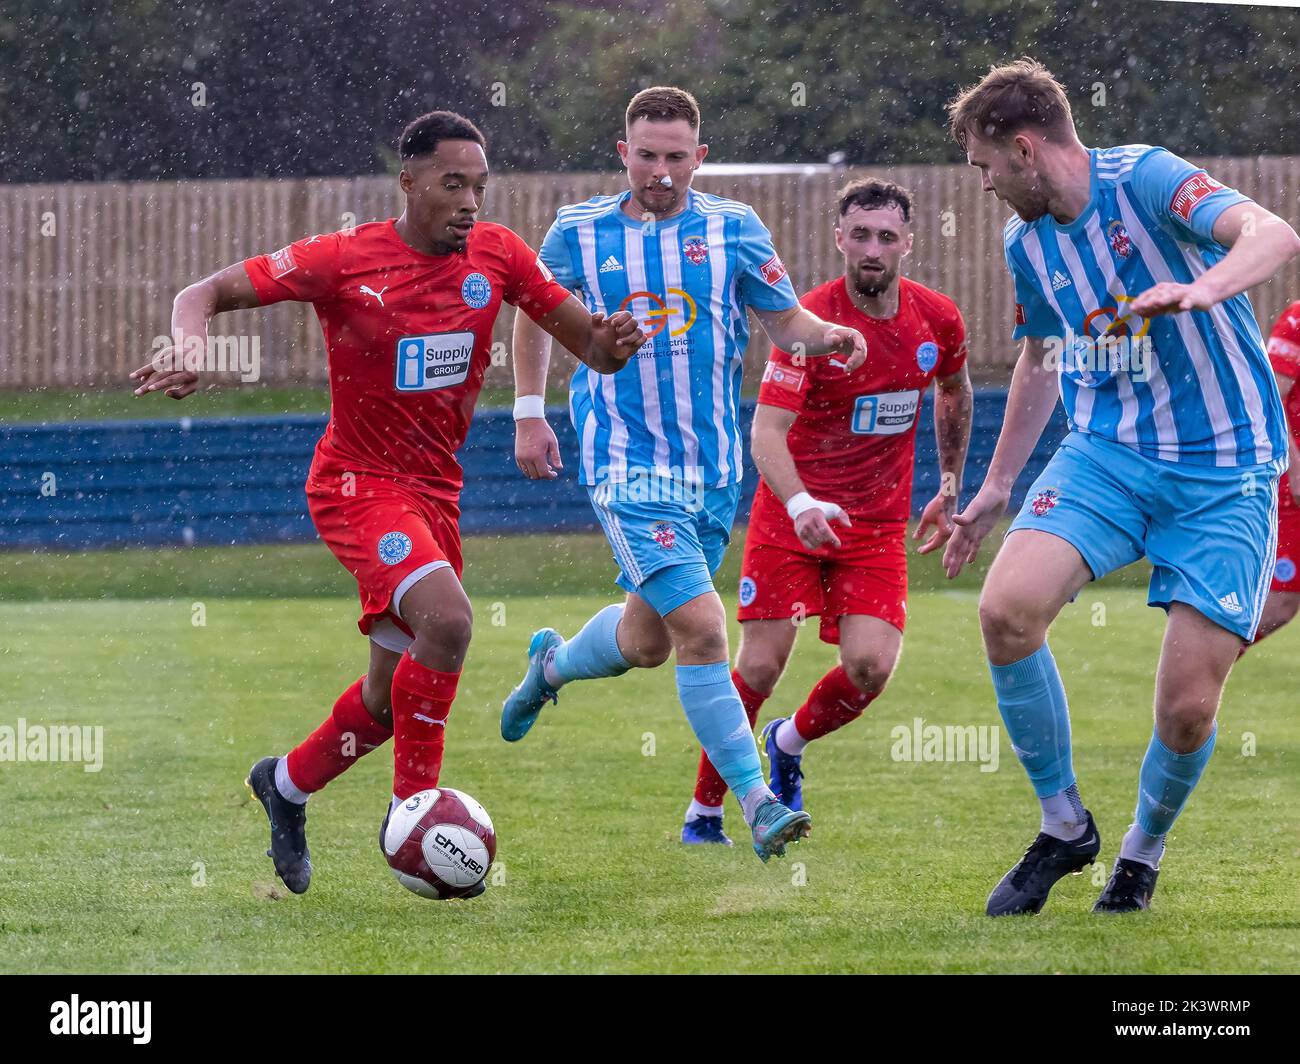 Liversedge hosted Warrington Rylands for a football match in the Northern Premier League Premier Division. Niah Payne runs at the Liversedge defenders Stock Photo